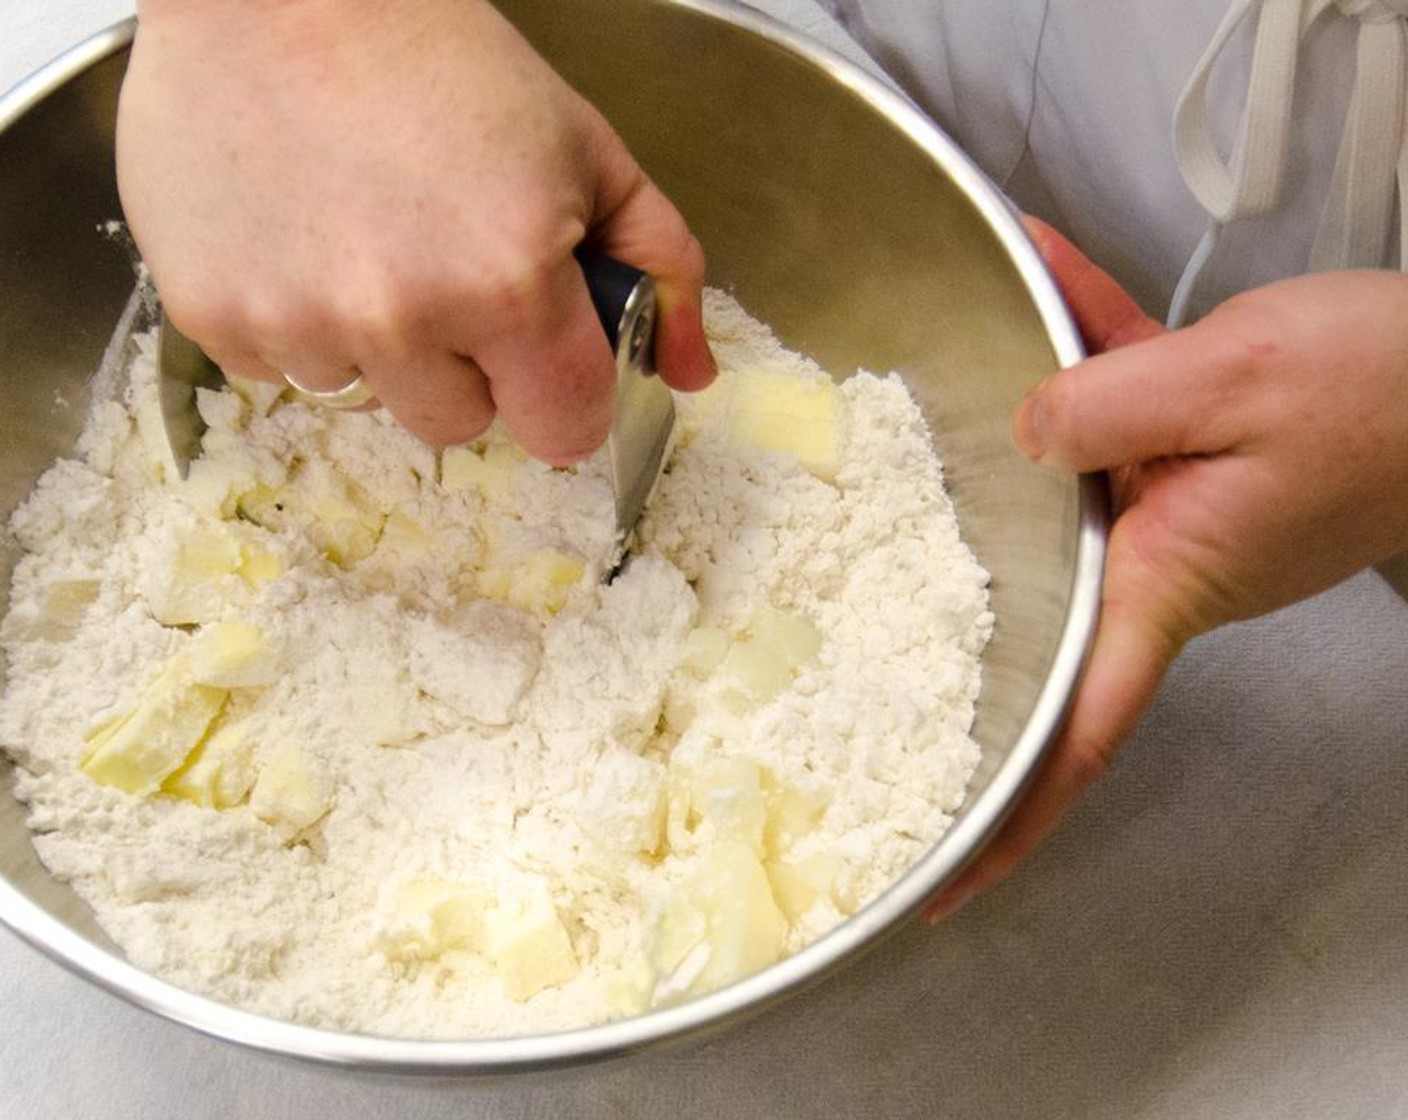 step 2 Pour the Gluten-Free Pie Crust Mix (1 pckg) into a large mixing bowl, or a food processor fitted with a steel blade, and add the butter and shortening. Pulse or use a pastry blender or two knives to cut butter and shortening in.